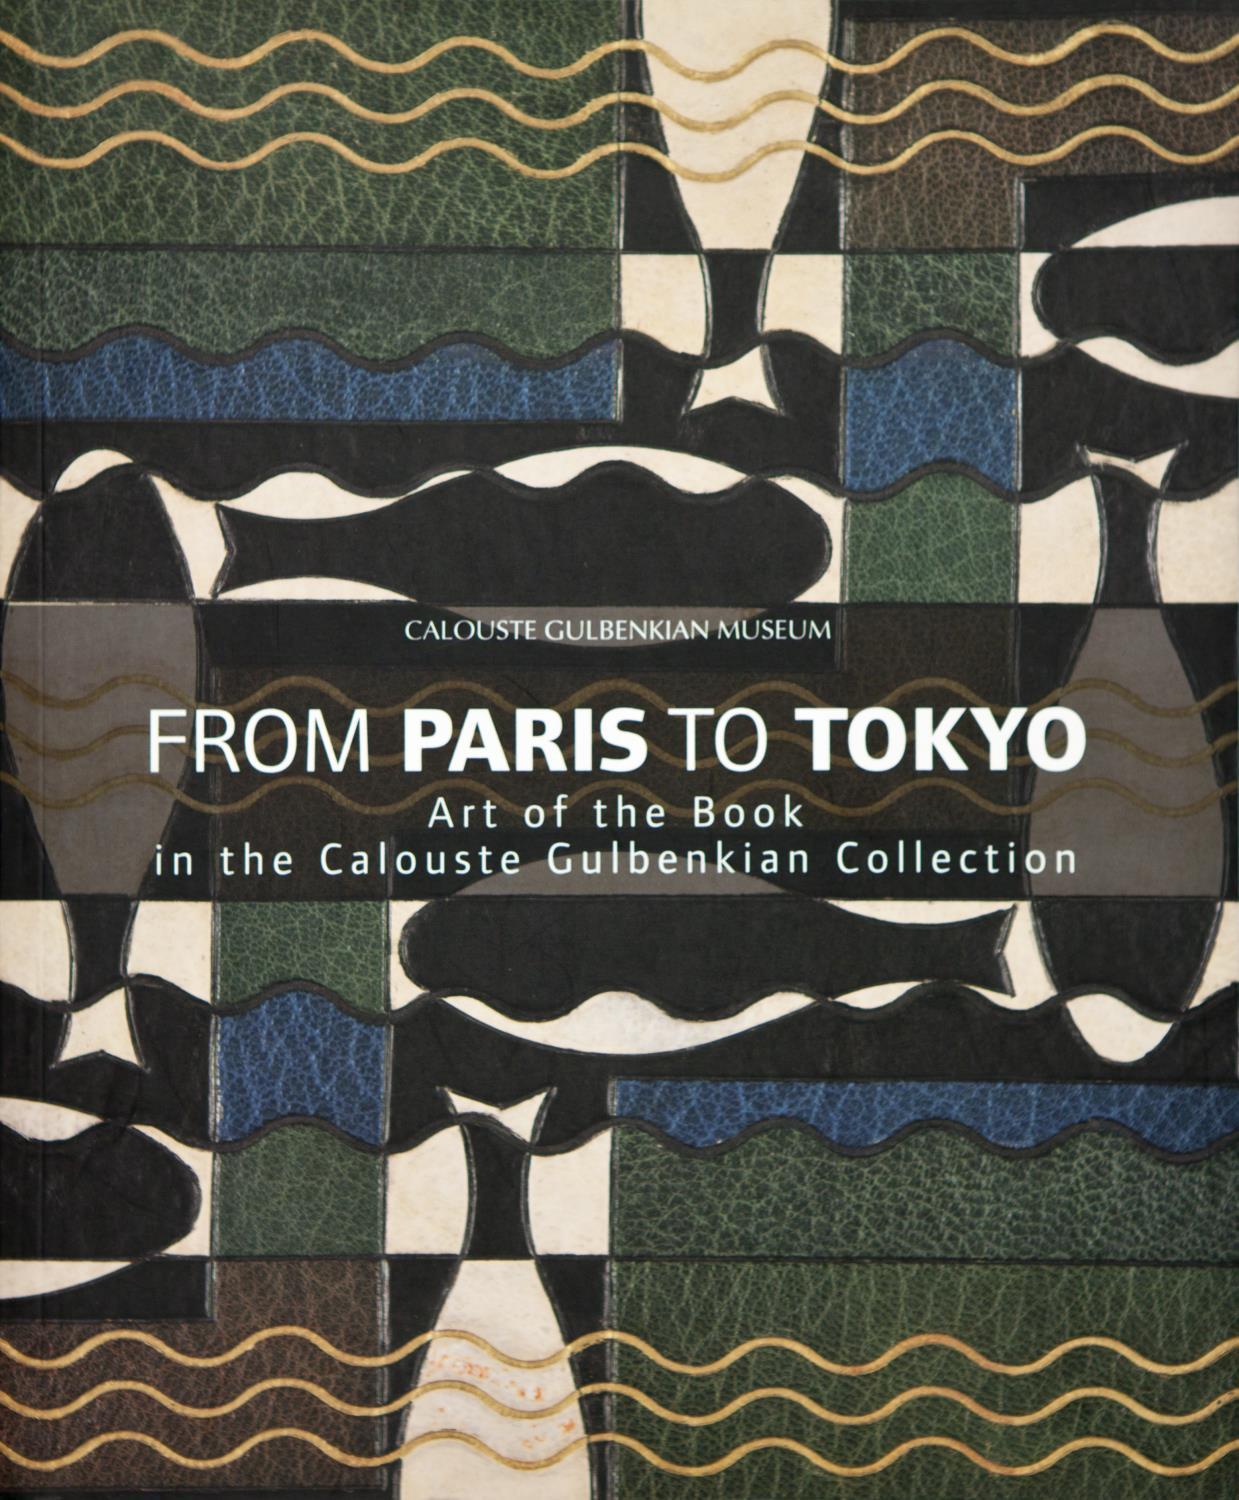 From Paris to Tokyo. Art of the Book in the Calouste Gulbenkian Collection